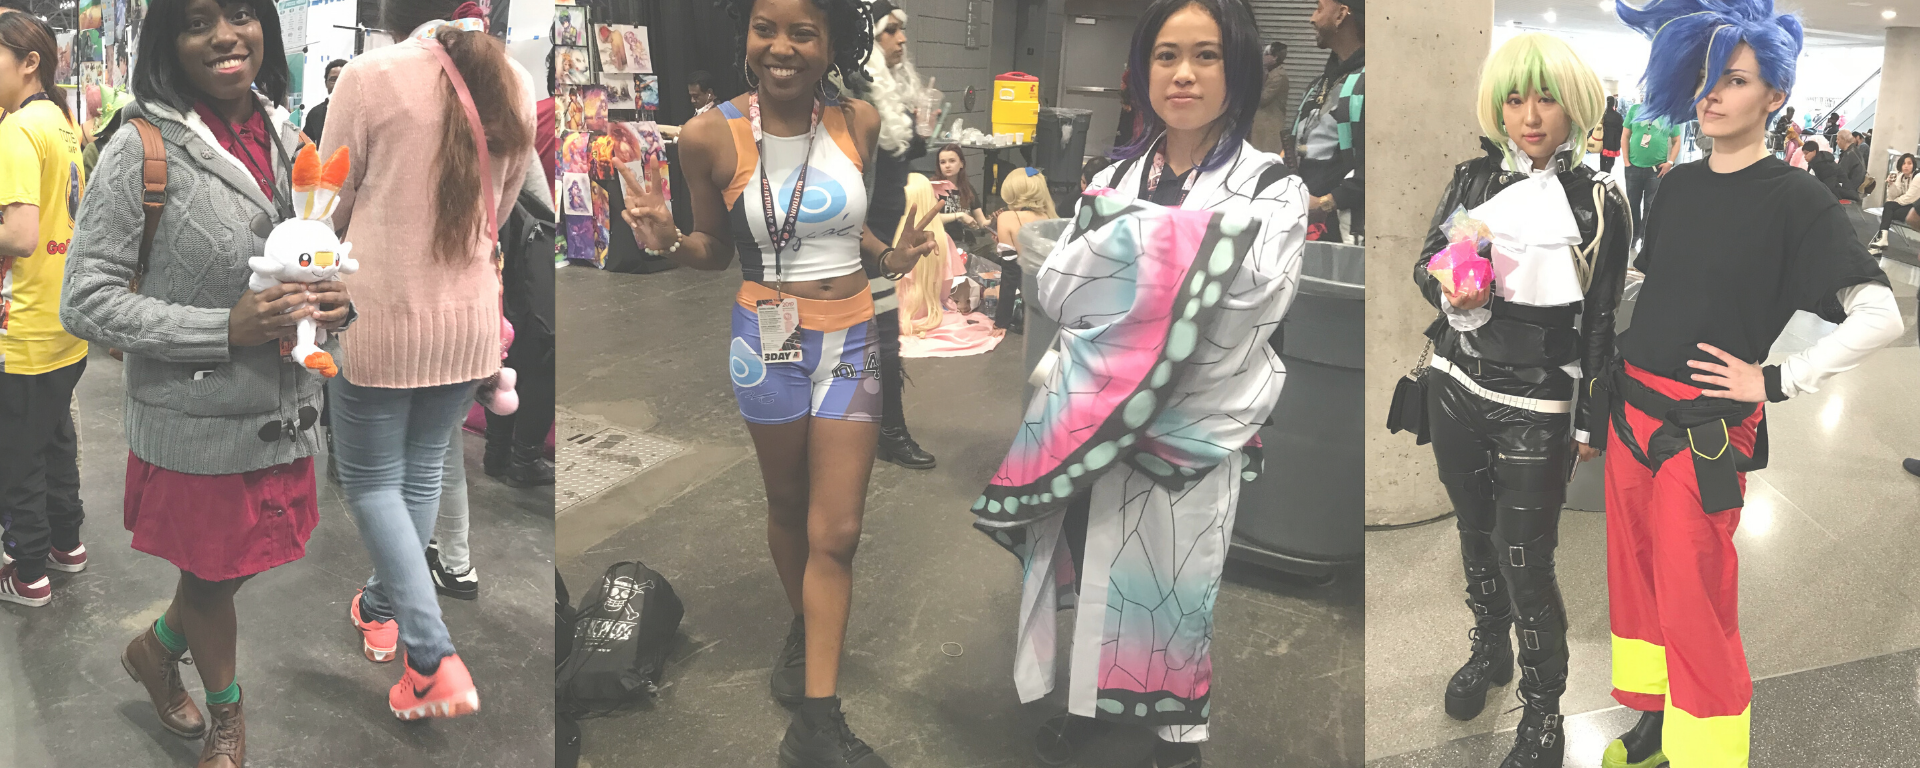 Cosplayers at Anime NYC 2019